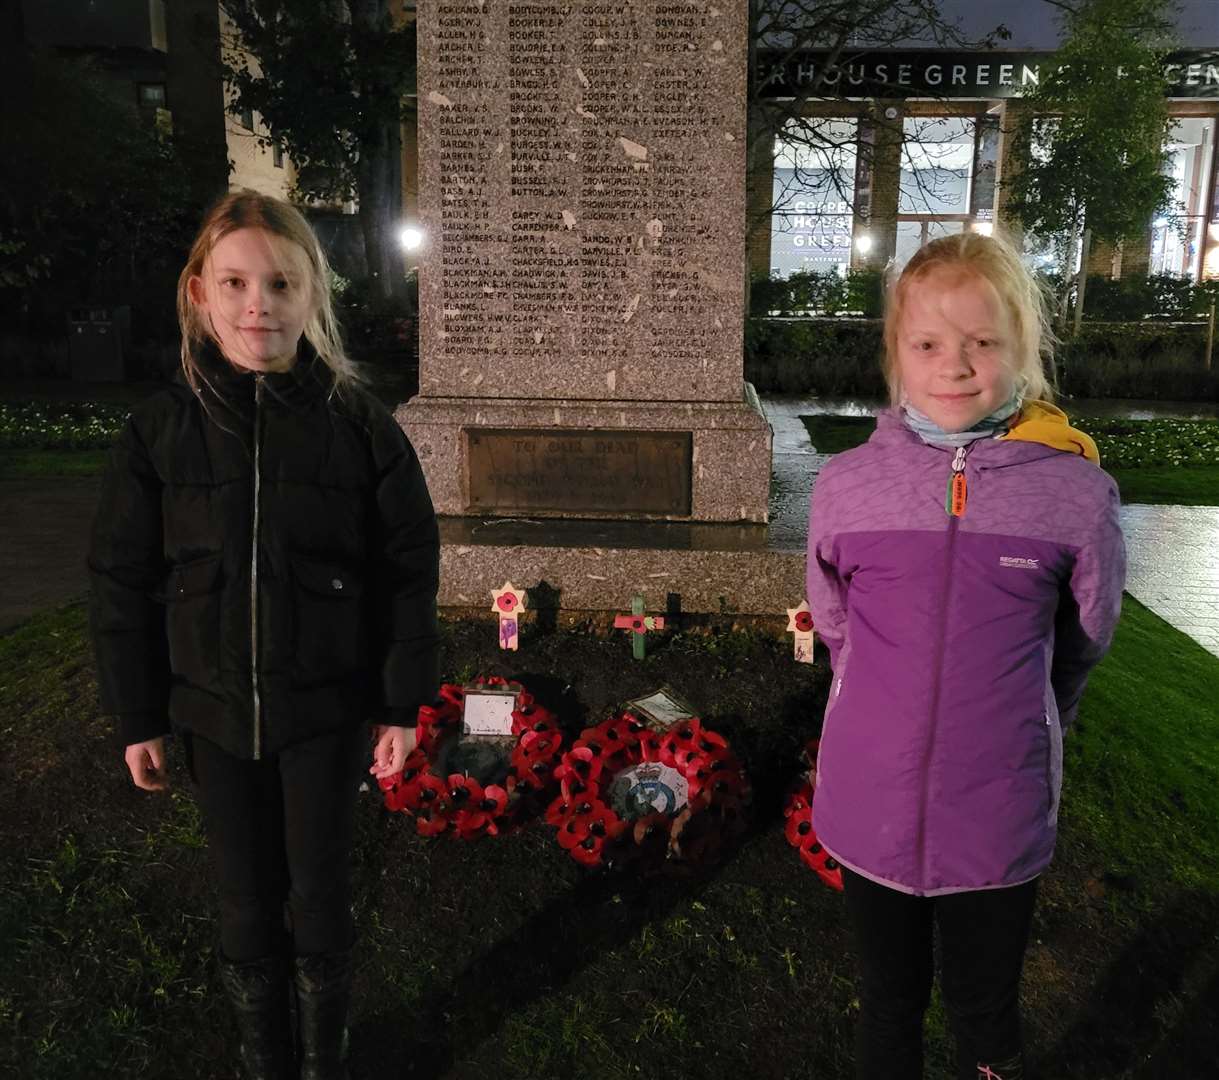 The girls were excited to see one of their handmade crosses be placed on the war memorial